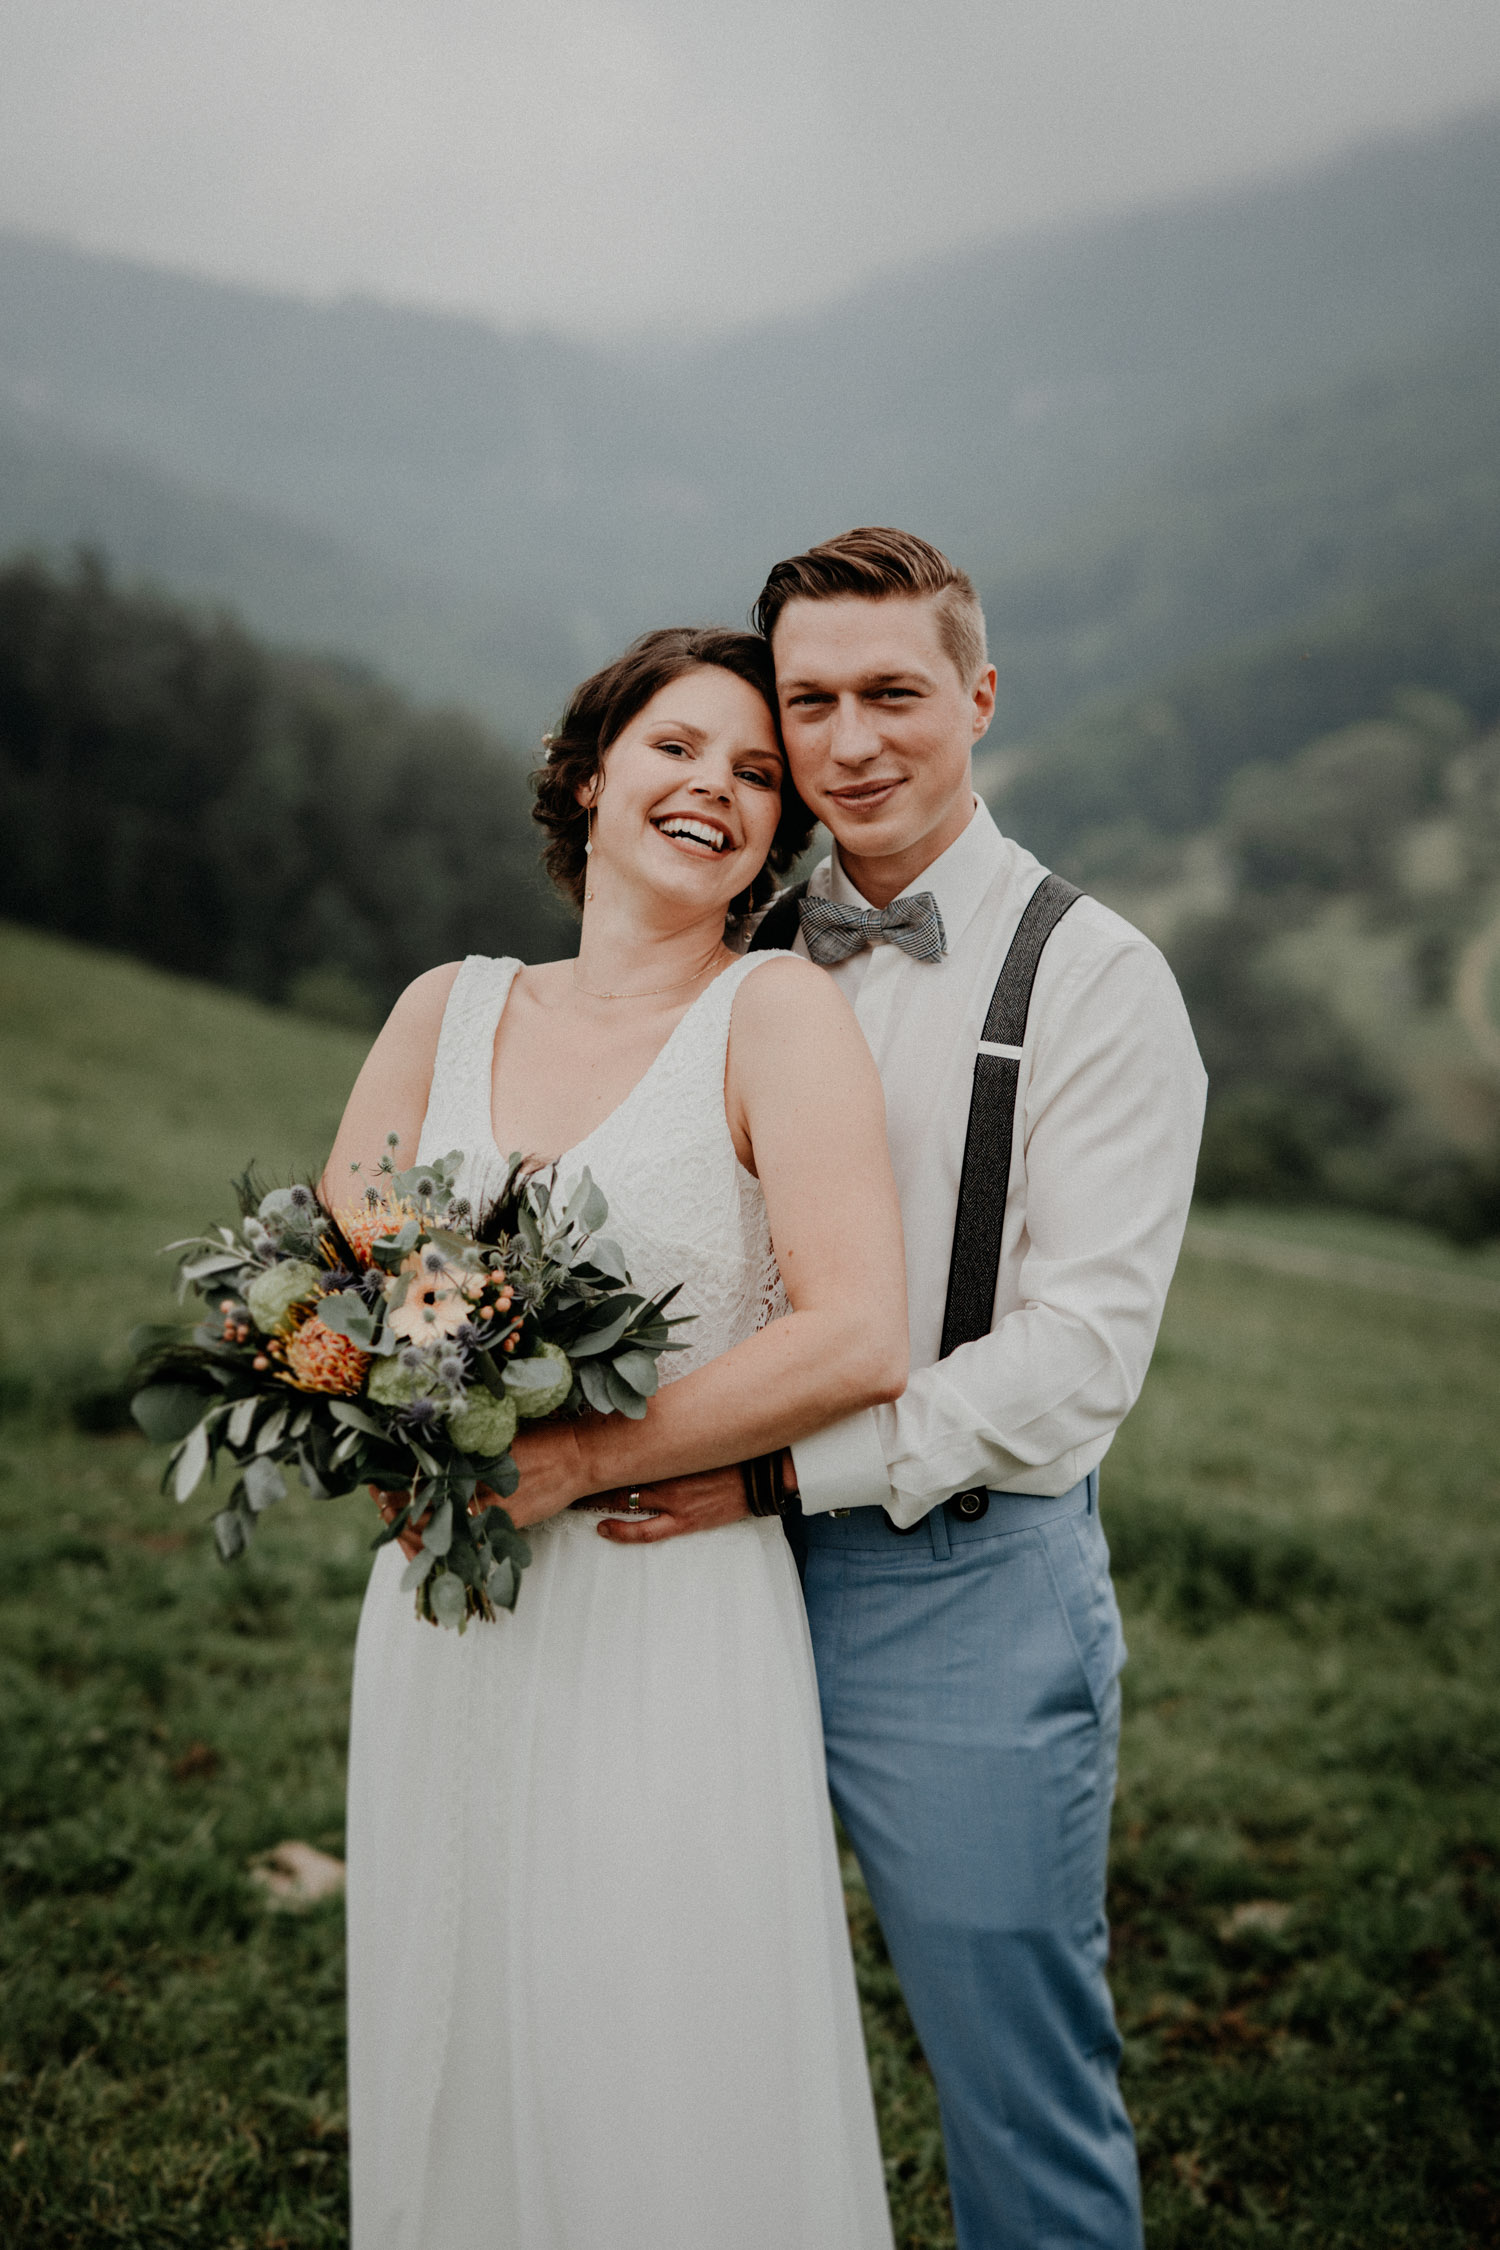 Vintage Industrial Bohemian Wedding in Switzerland wedding photographer elopement photographer getting ready bridal couple shooting swiss mountains